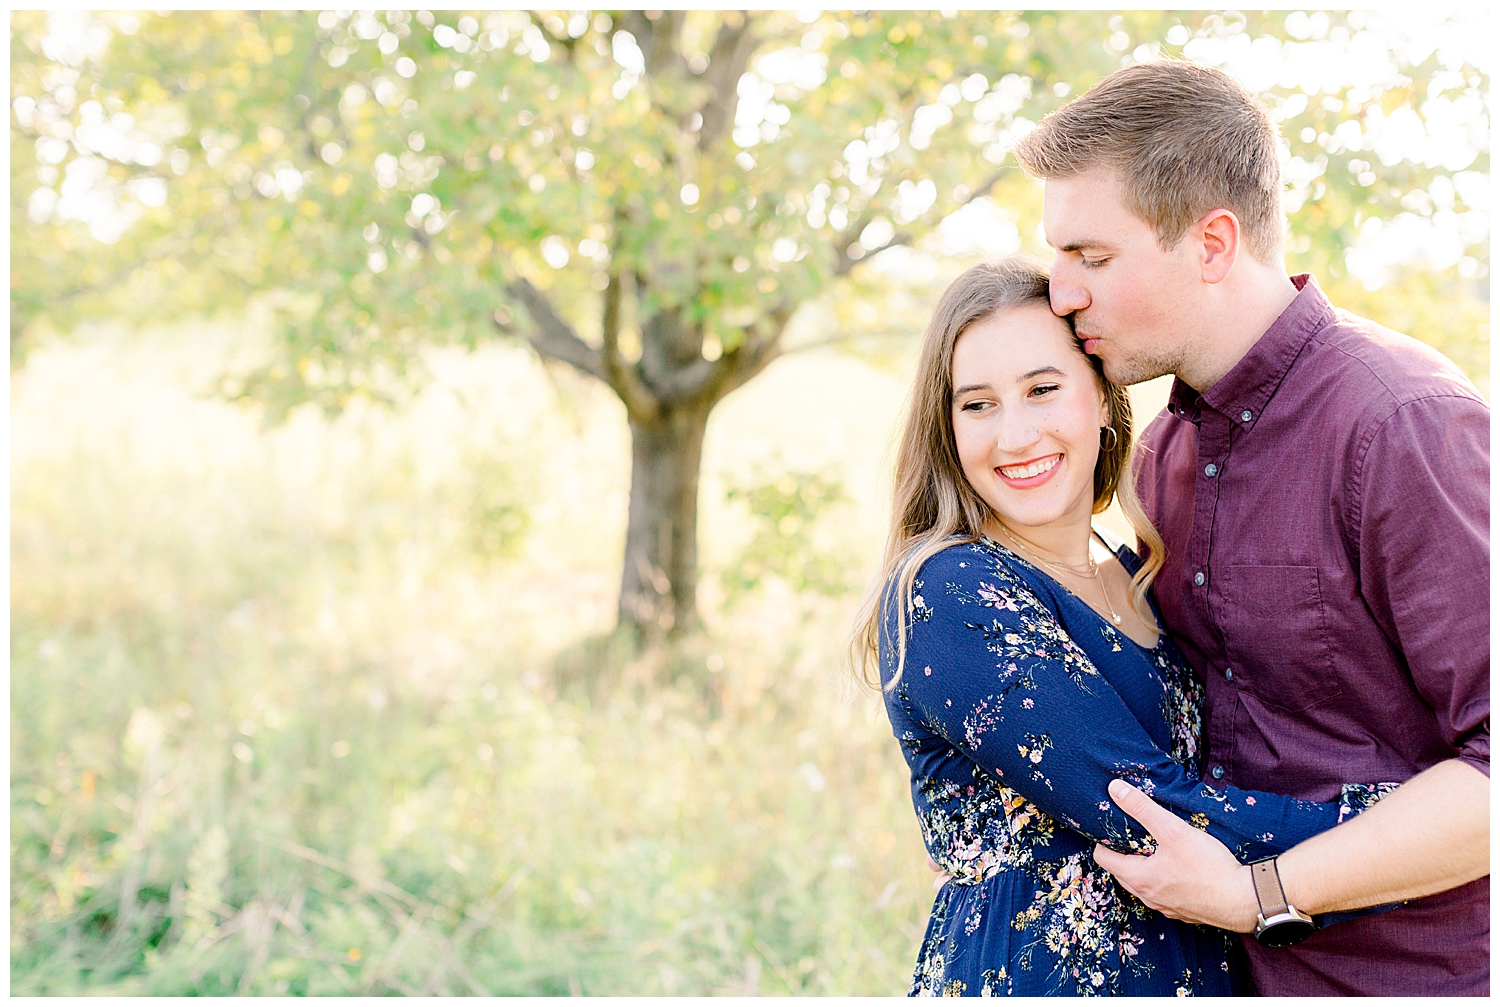 Chagrin_Falls_Orchard_Hill_Park_Pattersons_Fruit_Farm_Engagement_Kate_Mannella_Photography